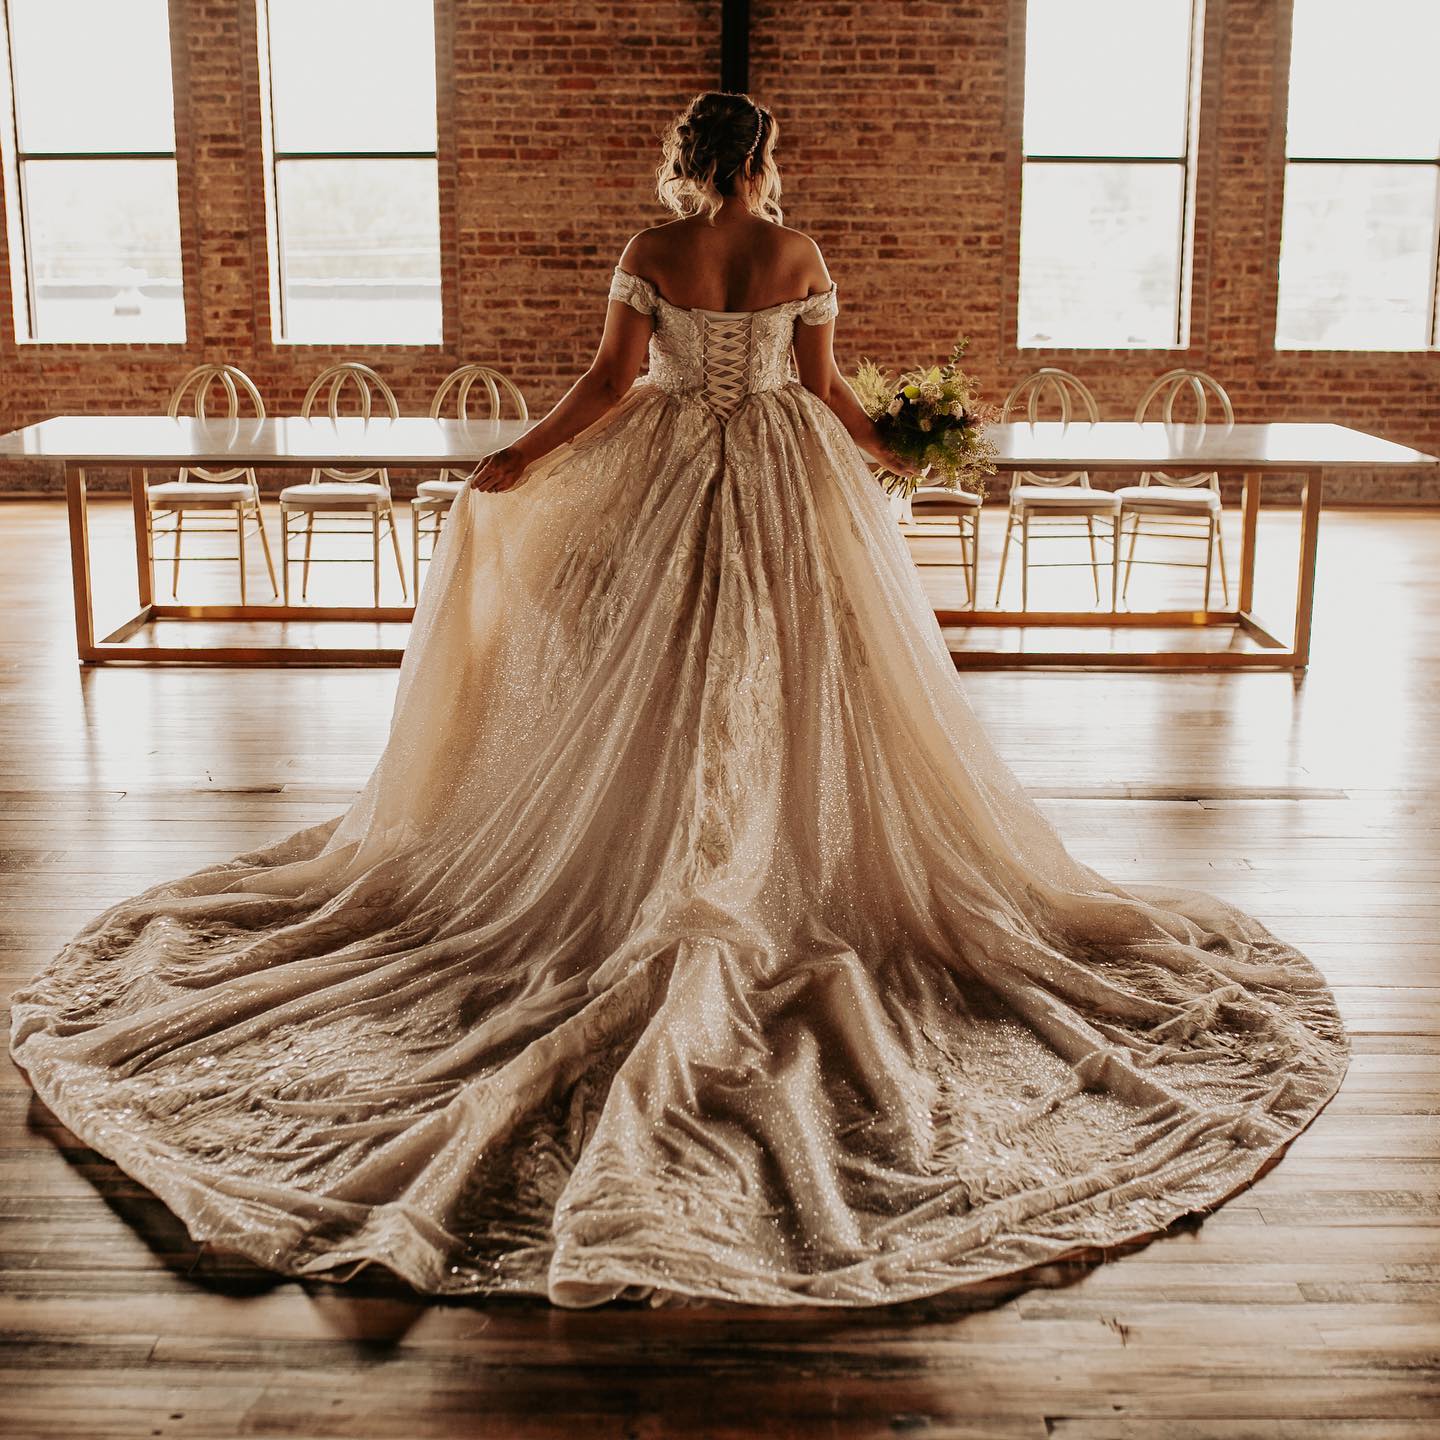 Find Your Dream Wedding Dress at Couture by Tess Bridal